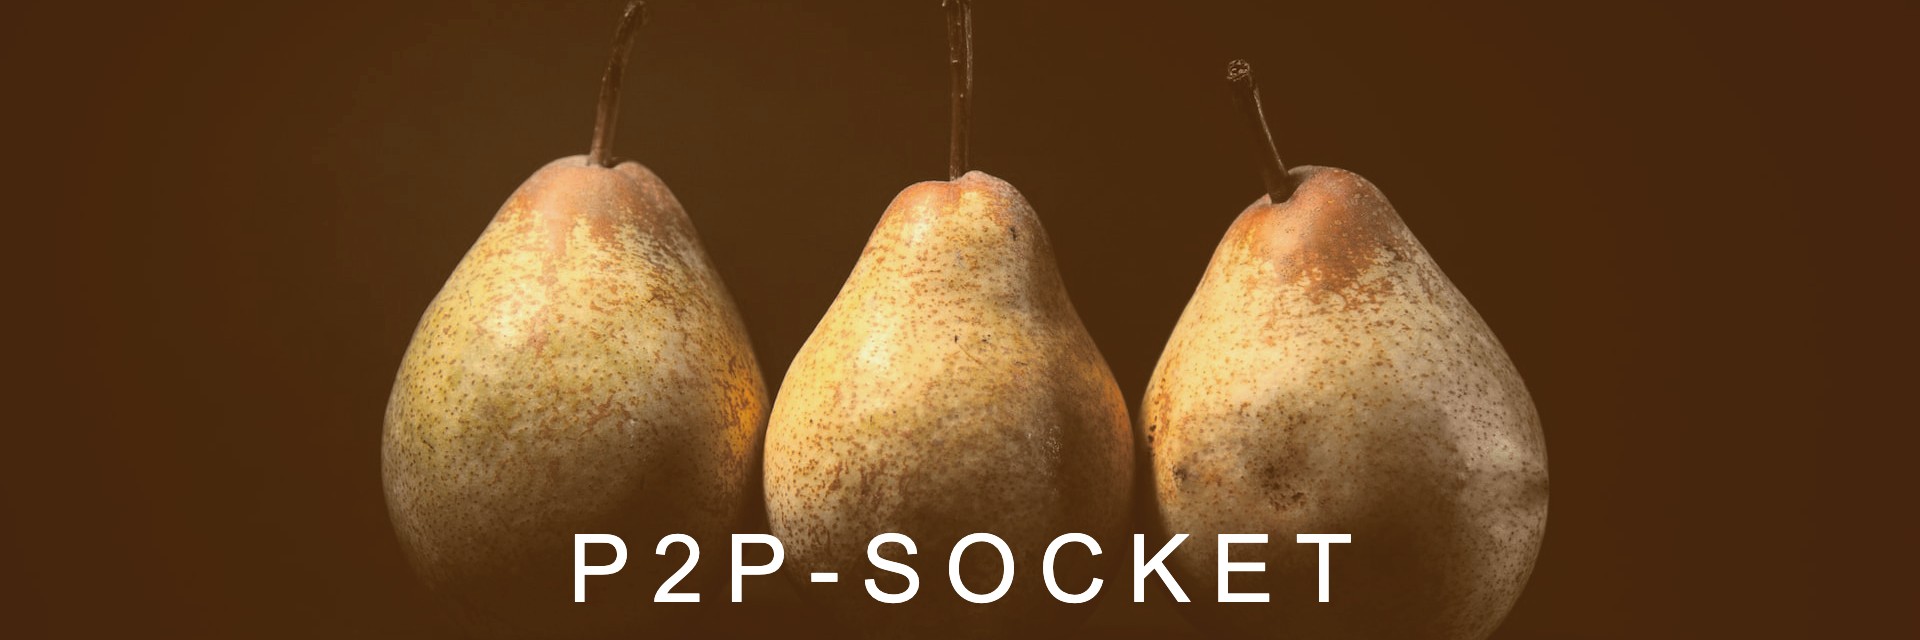 Banner image of three pears